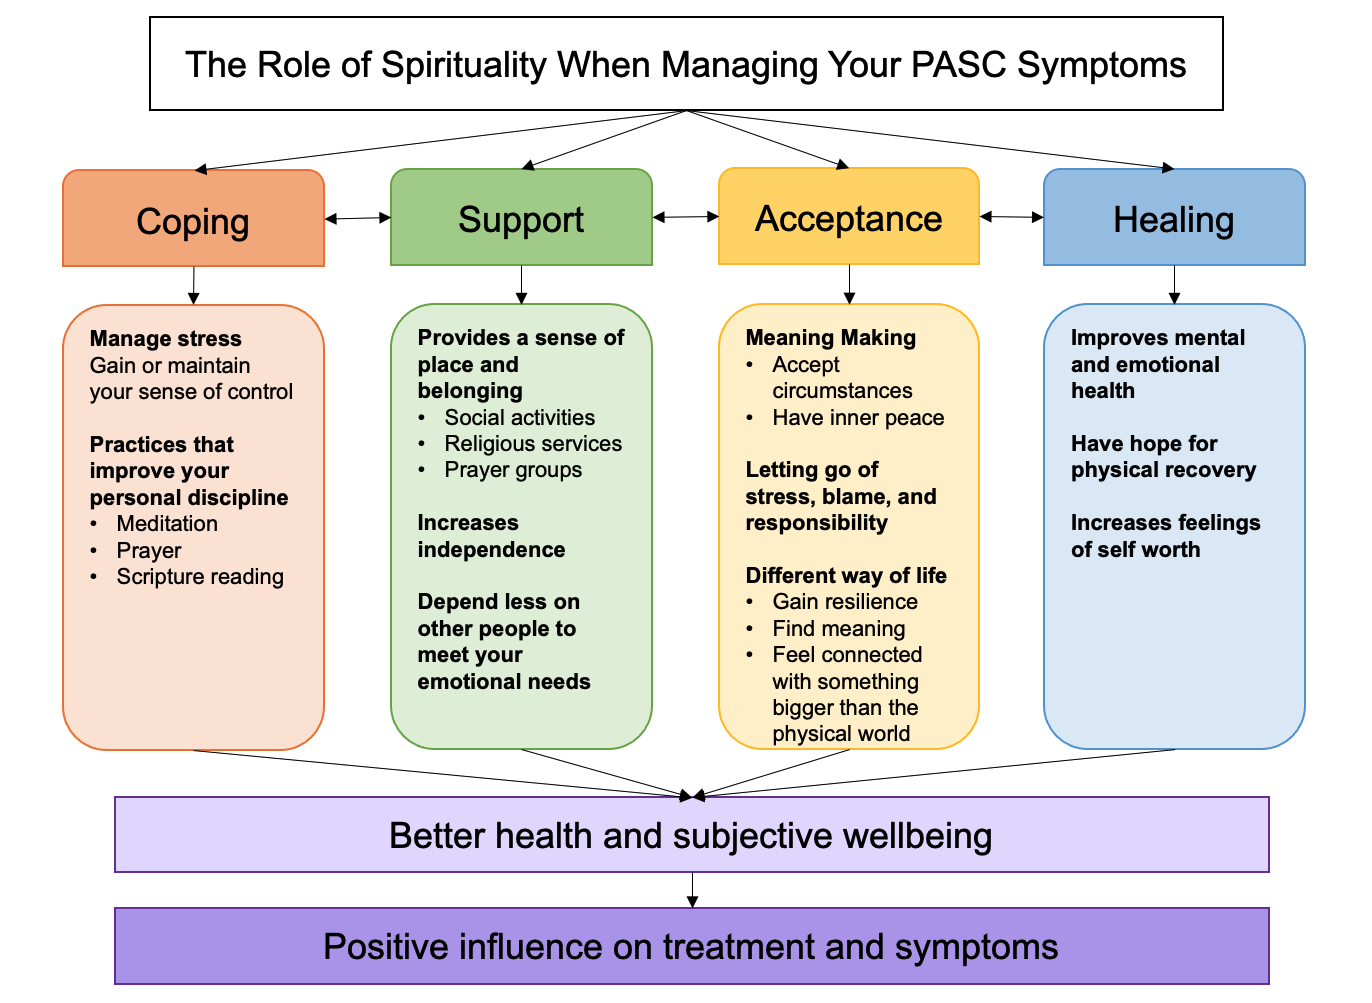 A diagram showing how the role of spirituality when managing your PASC symptoms through coping, support, acceptance, and healing aspects that lead to better health and wellbeing and a positive influence on treatment and symptoms